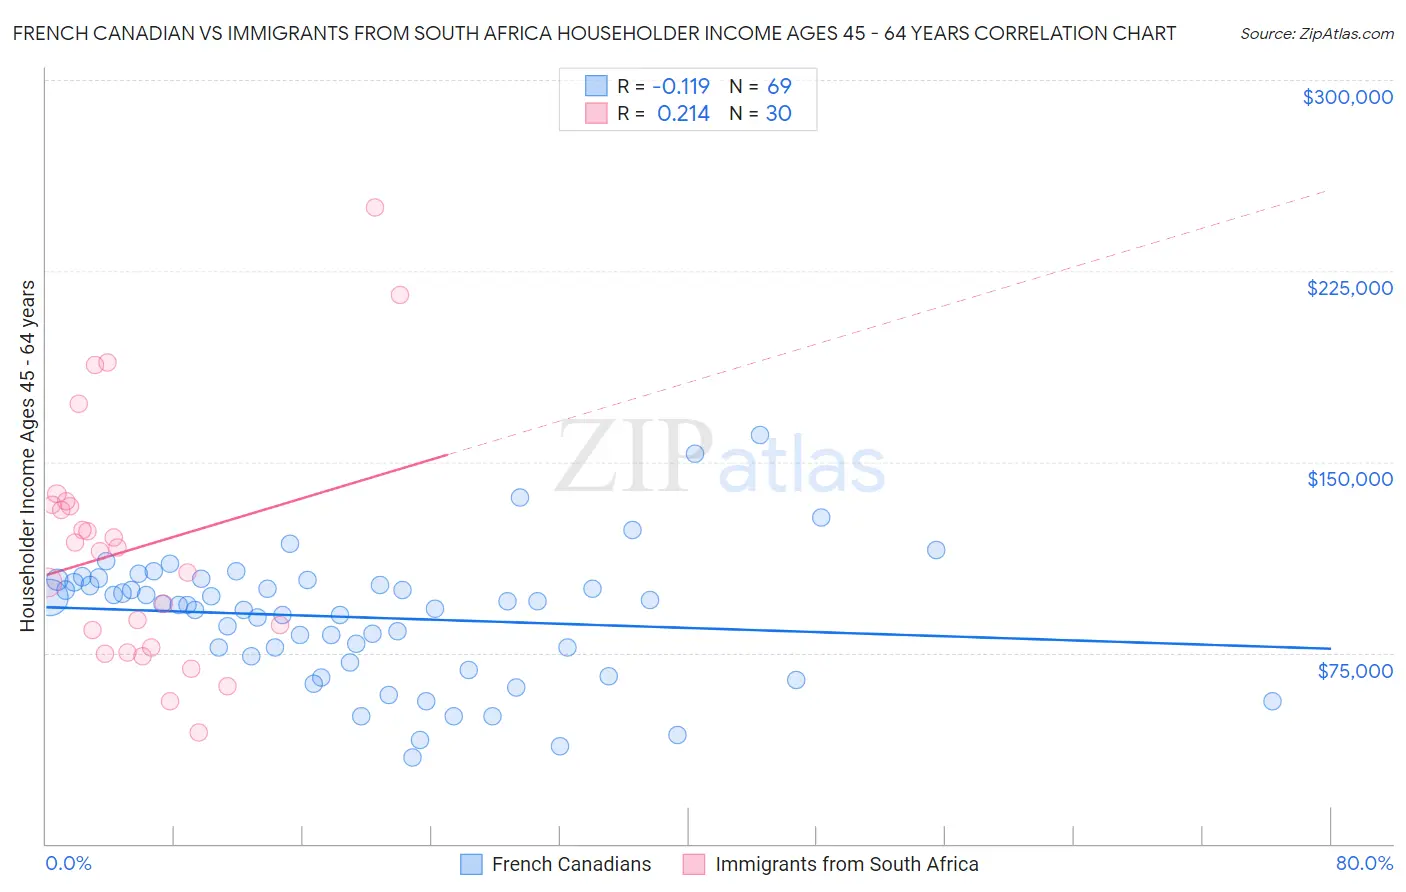 French Canadian vs Immigrants from South Africa Householder Income Ages 45 - 64 years